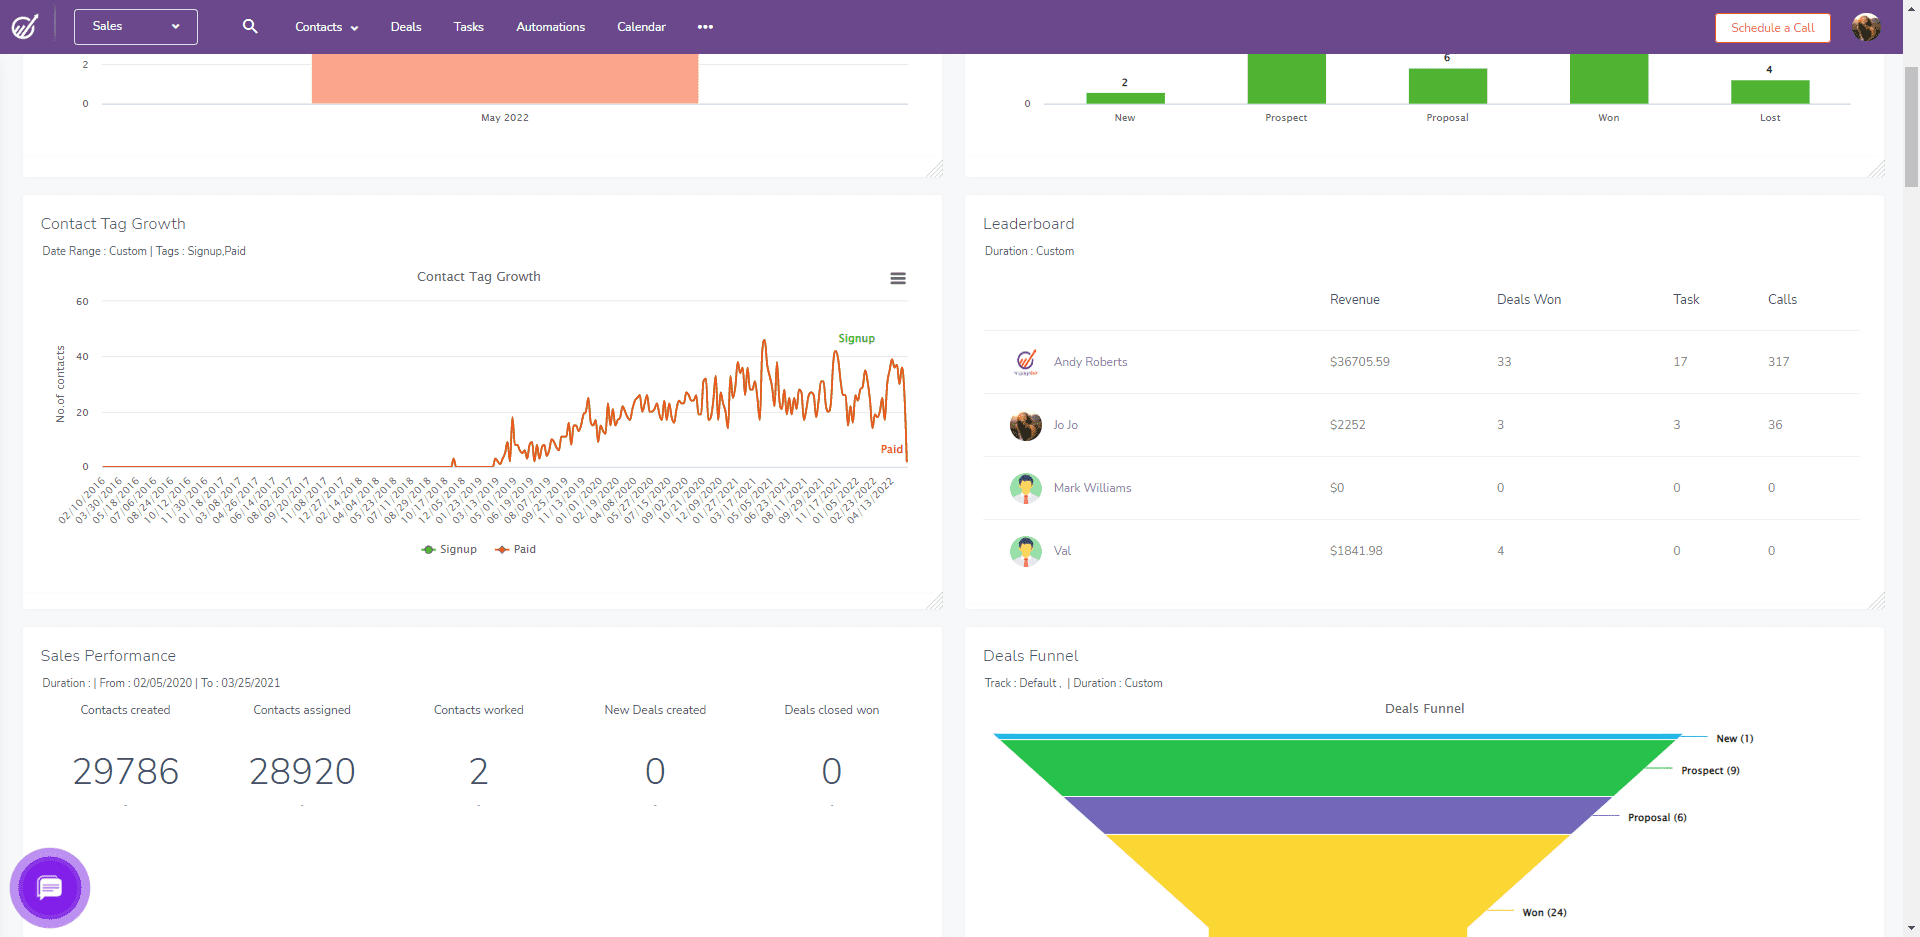 Sales performance dashboard example by EngageBay